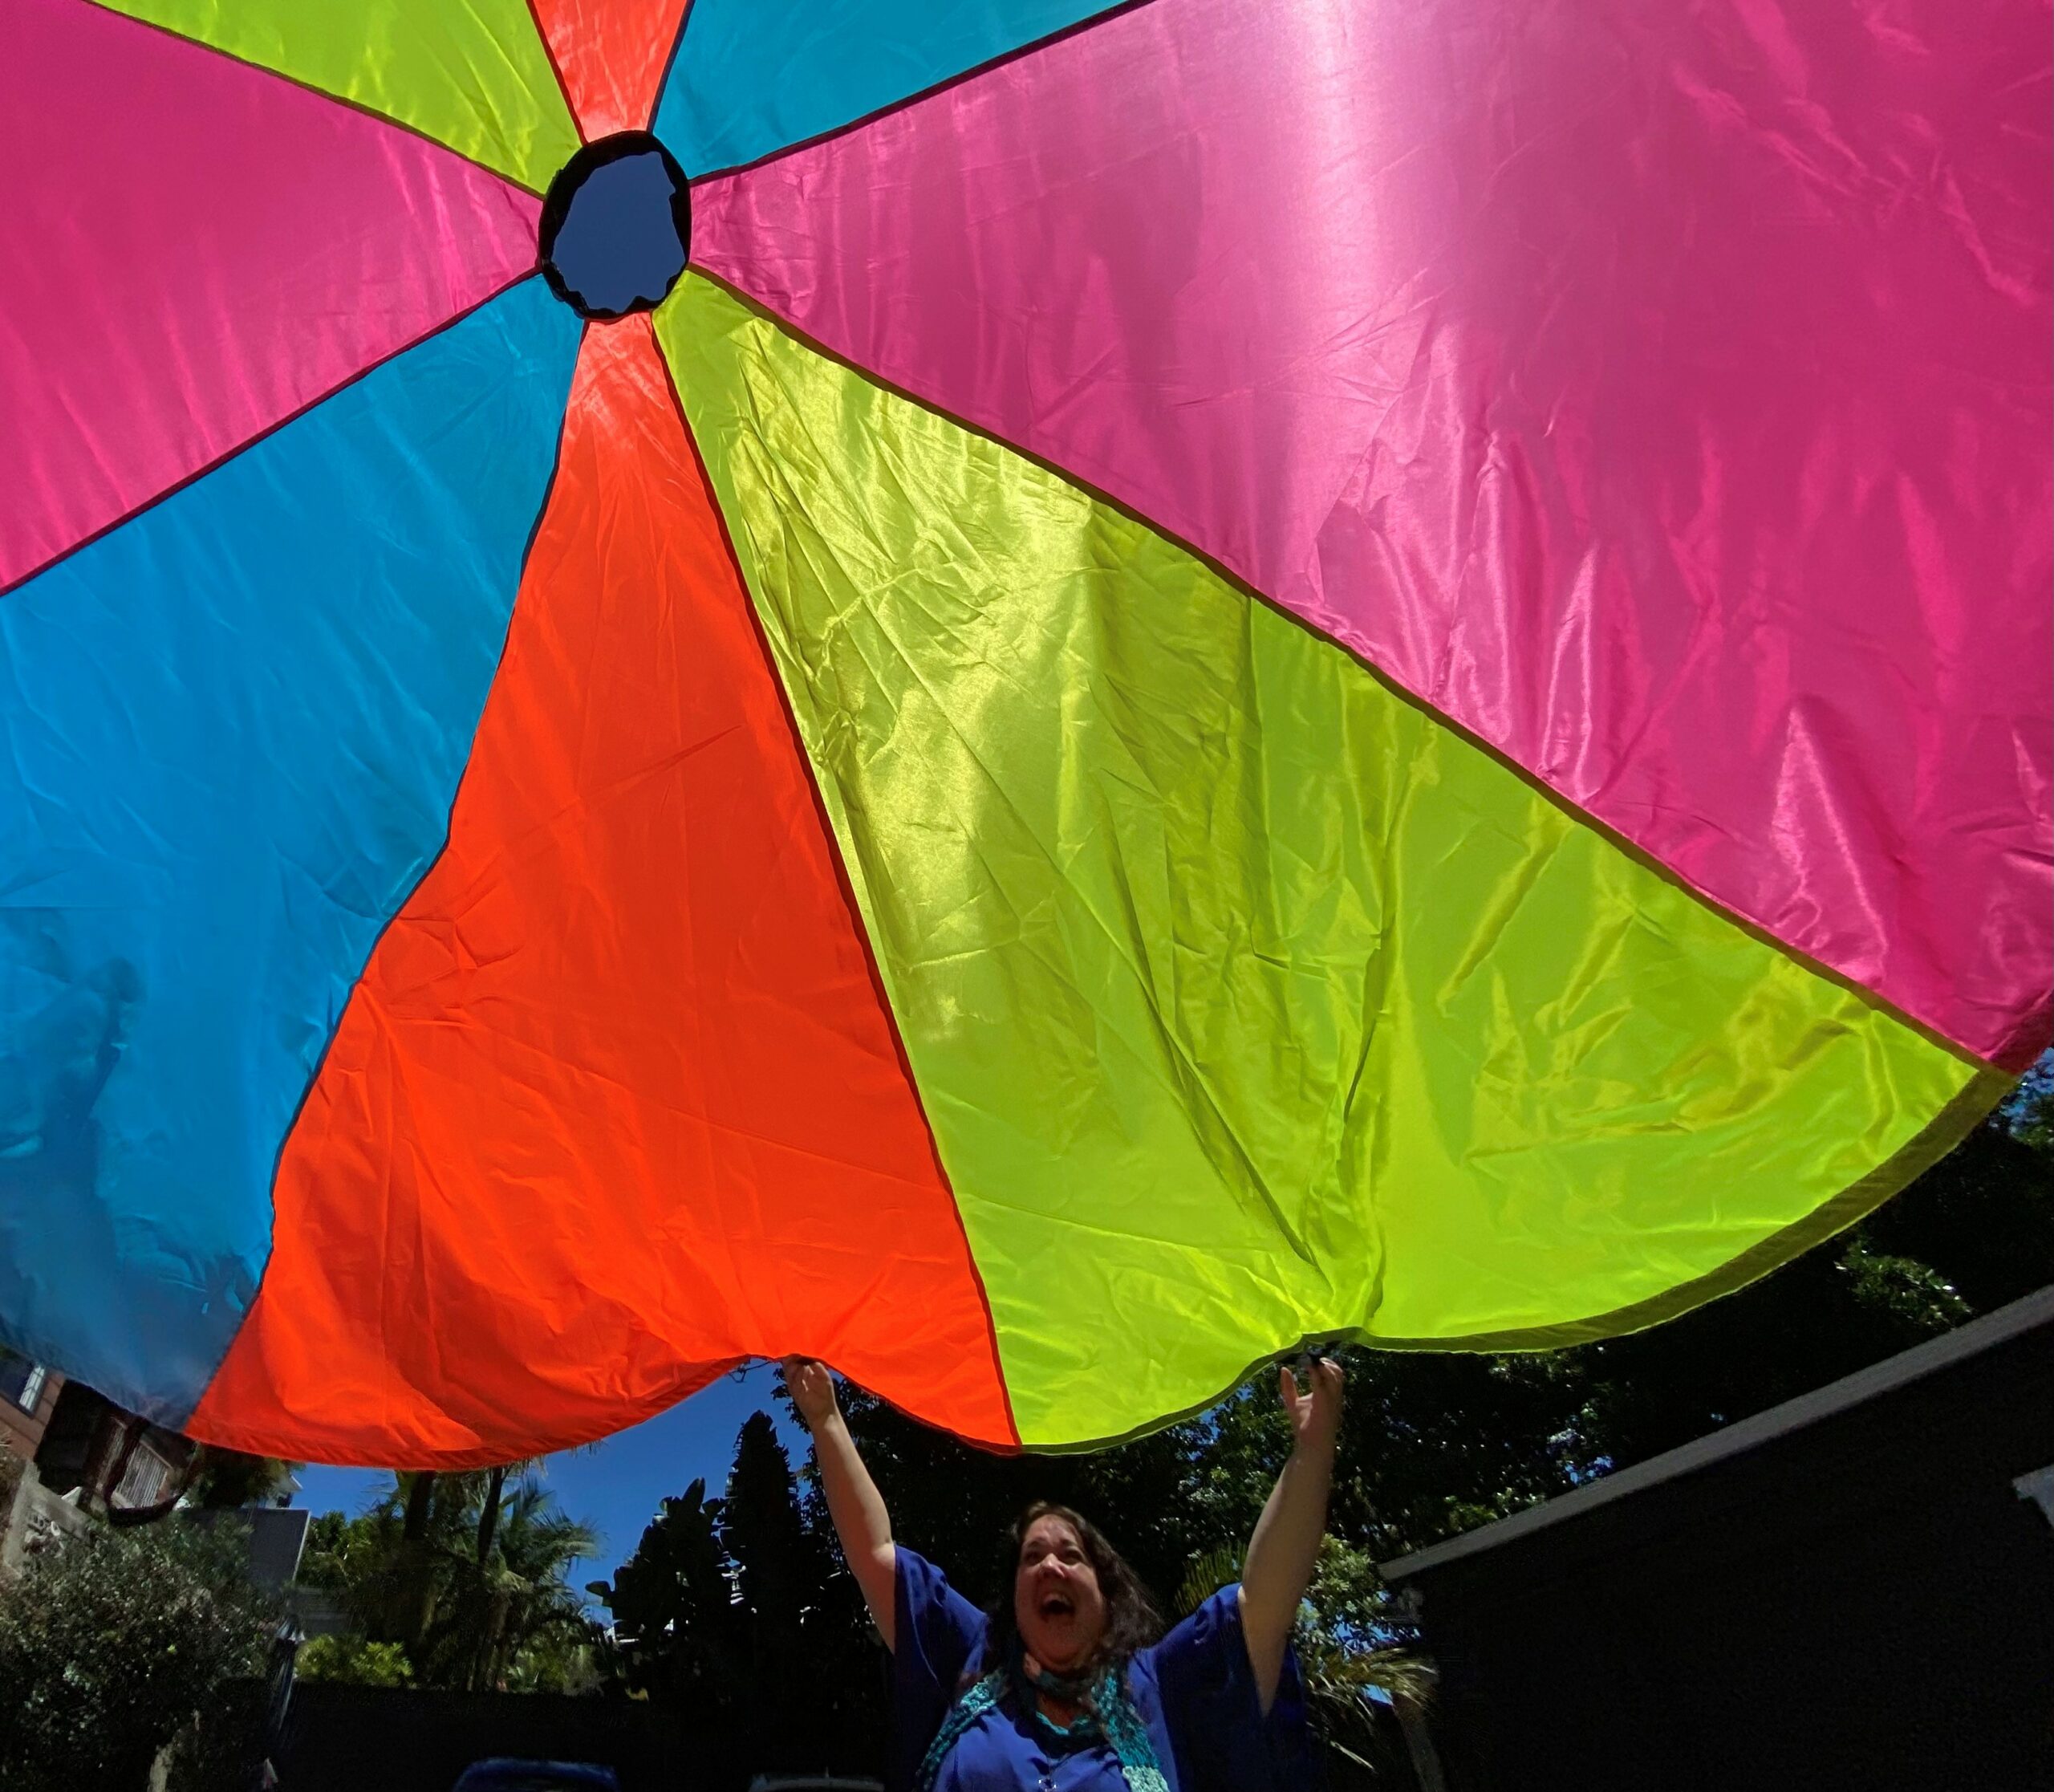 A Real staff member throws up a colourful parachute - one of the sensory tools they use.